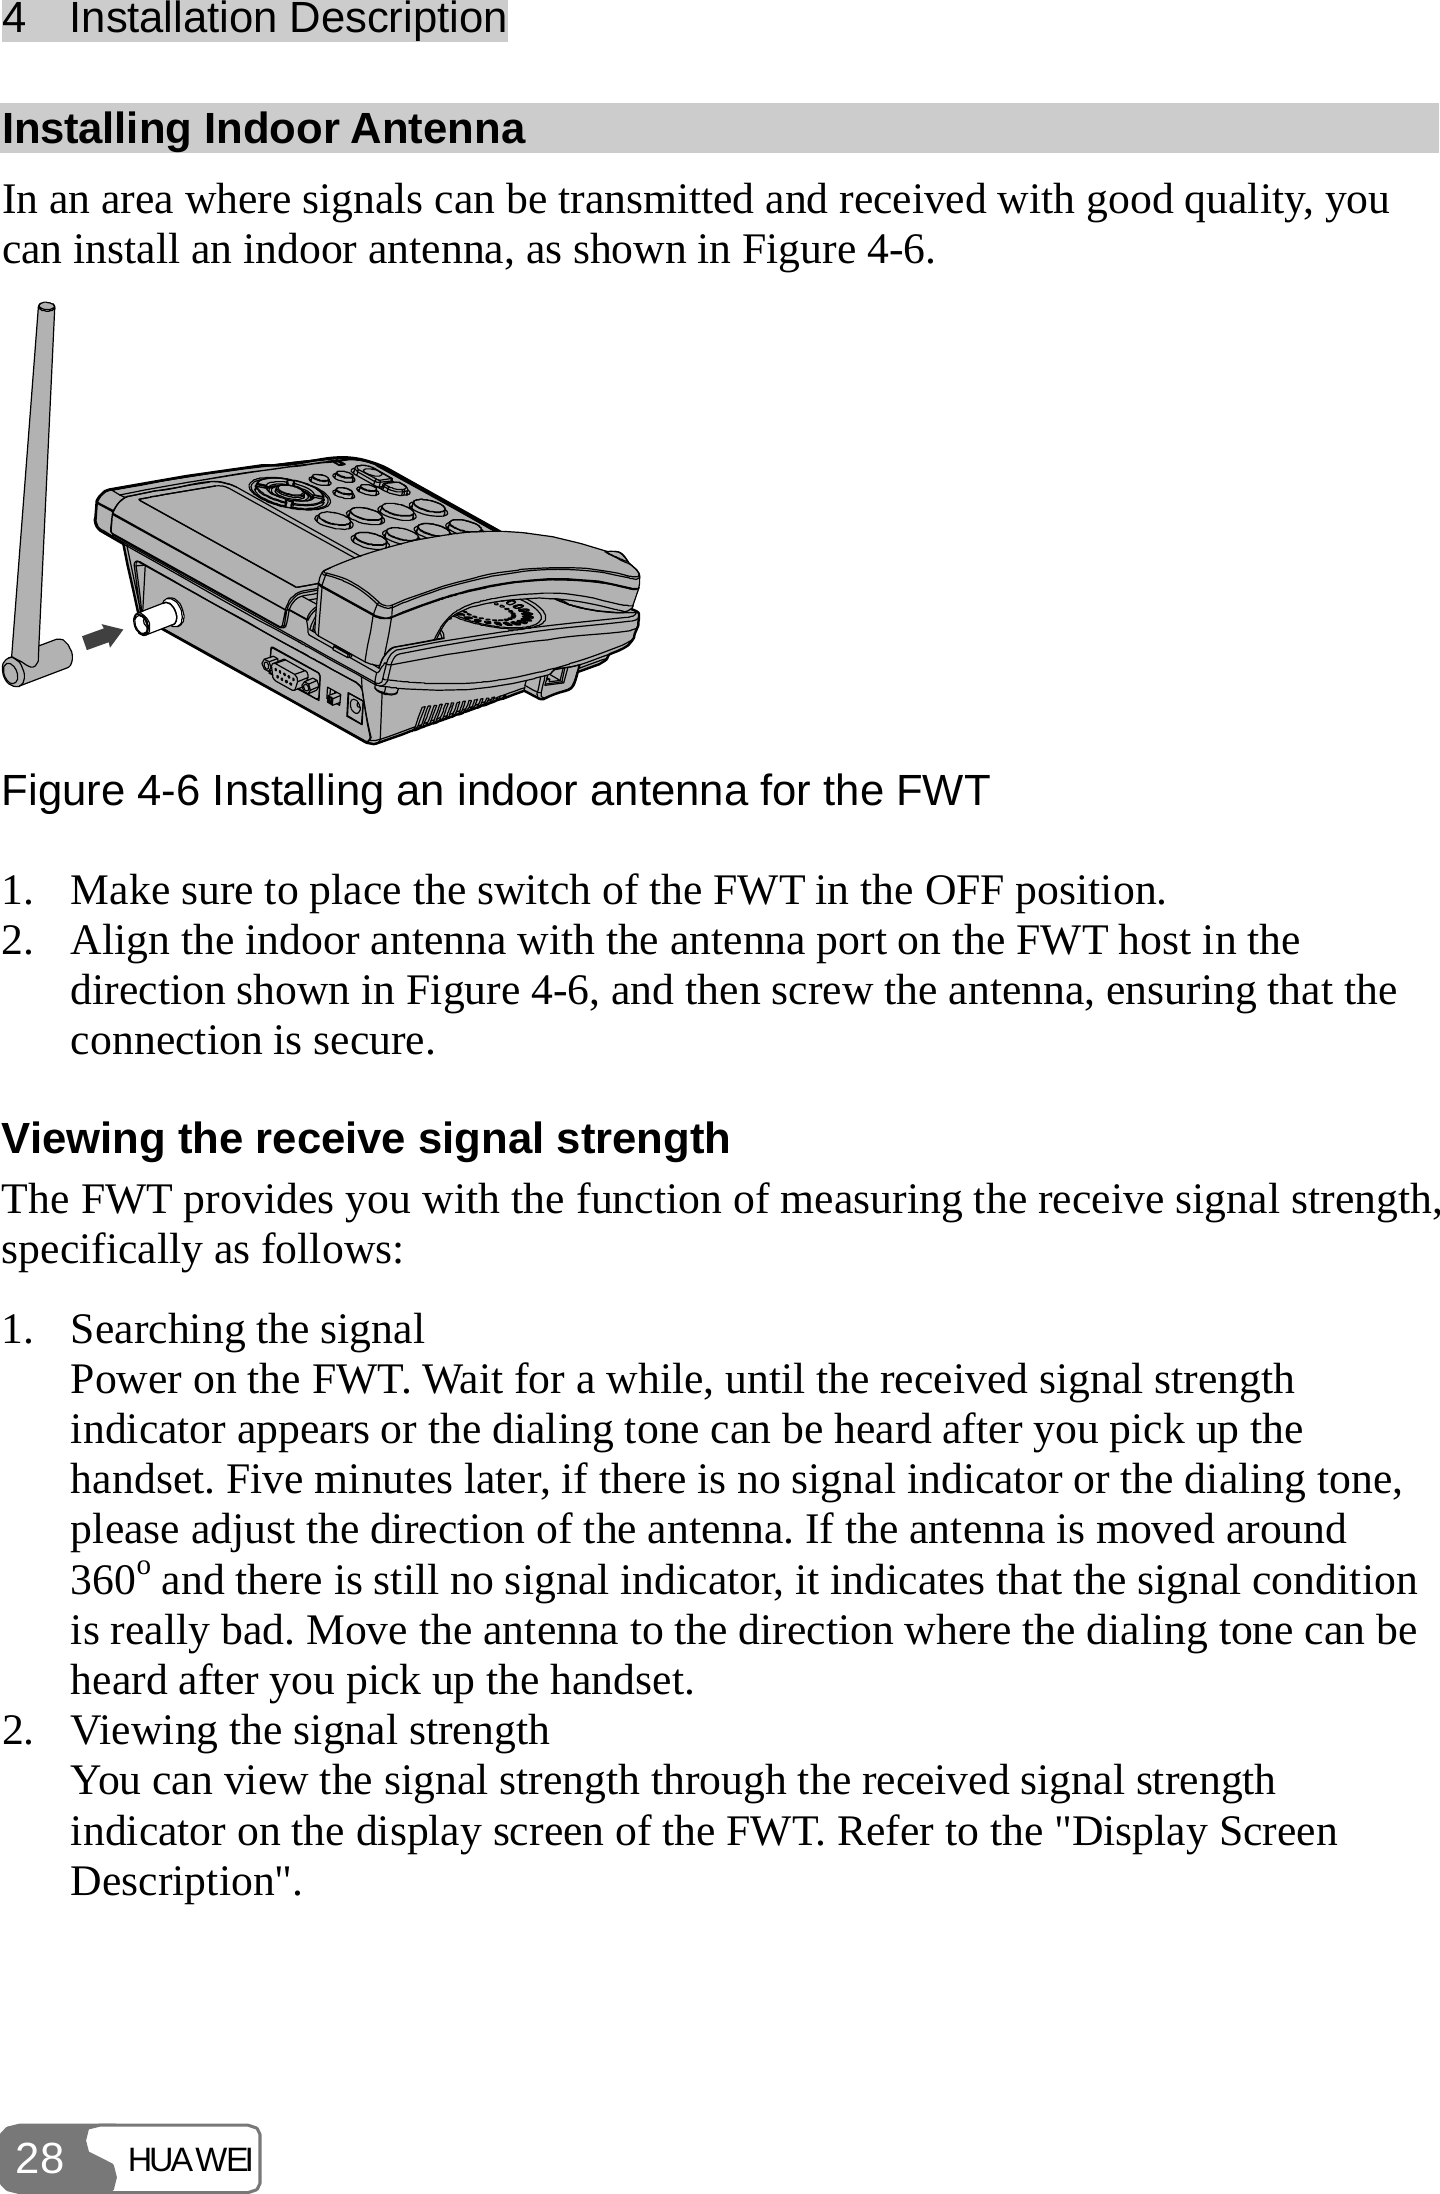 4  Installation Description HUAWEI 28 Installing Indoor Antenna In an area where signals can be transmitted and received with good quality, you can install an indoor antenna, as shown in Figure 4-6.  Figure 4-6 Installing an indoor antenna for the FWT 1. Make sure to place the switch of the FWT in the OFF position. 2. Align the indoor antenna with the antenna port on the FWT host in the direction shown in Figure 4-6, and then screw the antenna, ensuring that the connection is secure. Viewing the receive signal strength The FWT provides you with the function of measuring the receive signal strength, specifically as follows: 1. Searching the signal Power on the FWT. Wait for a while, until the received signal strength indicator appears or the dialing tone can be heard after you pick up the handset. Five minutes later, if there is no signal indicator or the dialing tone, please adjust the direction of the antenna. If the antenna is moved around 360o and there is still no signal indicator, it indicates that the signal condition is really bad. Move the antenna to the direction where the dialing tone can be heard after you pick up the handset. 2. Viewing the signal strength You can view the signal strength through the received signal strength indicator on the display screen of the FWT. Refer to the &quot;Display Screen Description&quot;. 